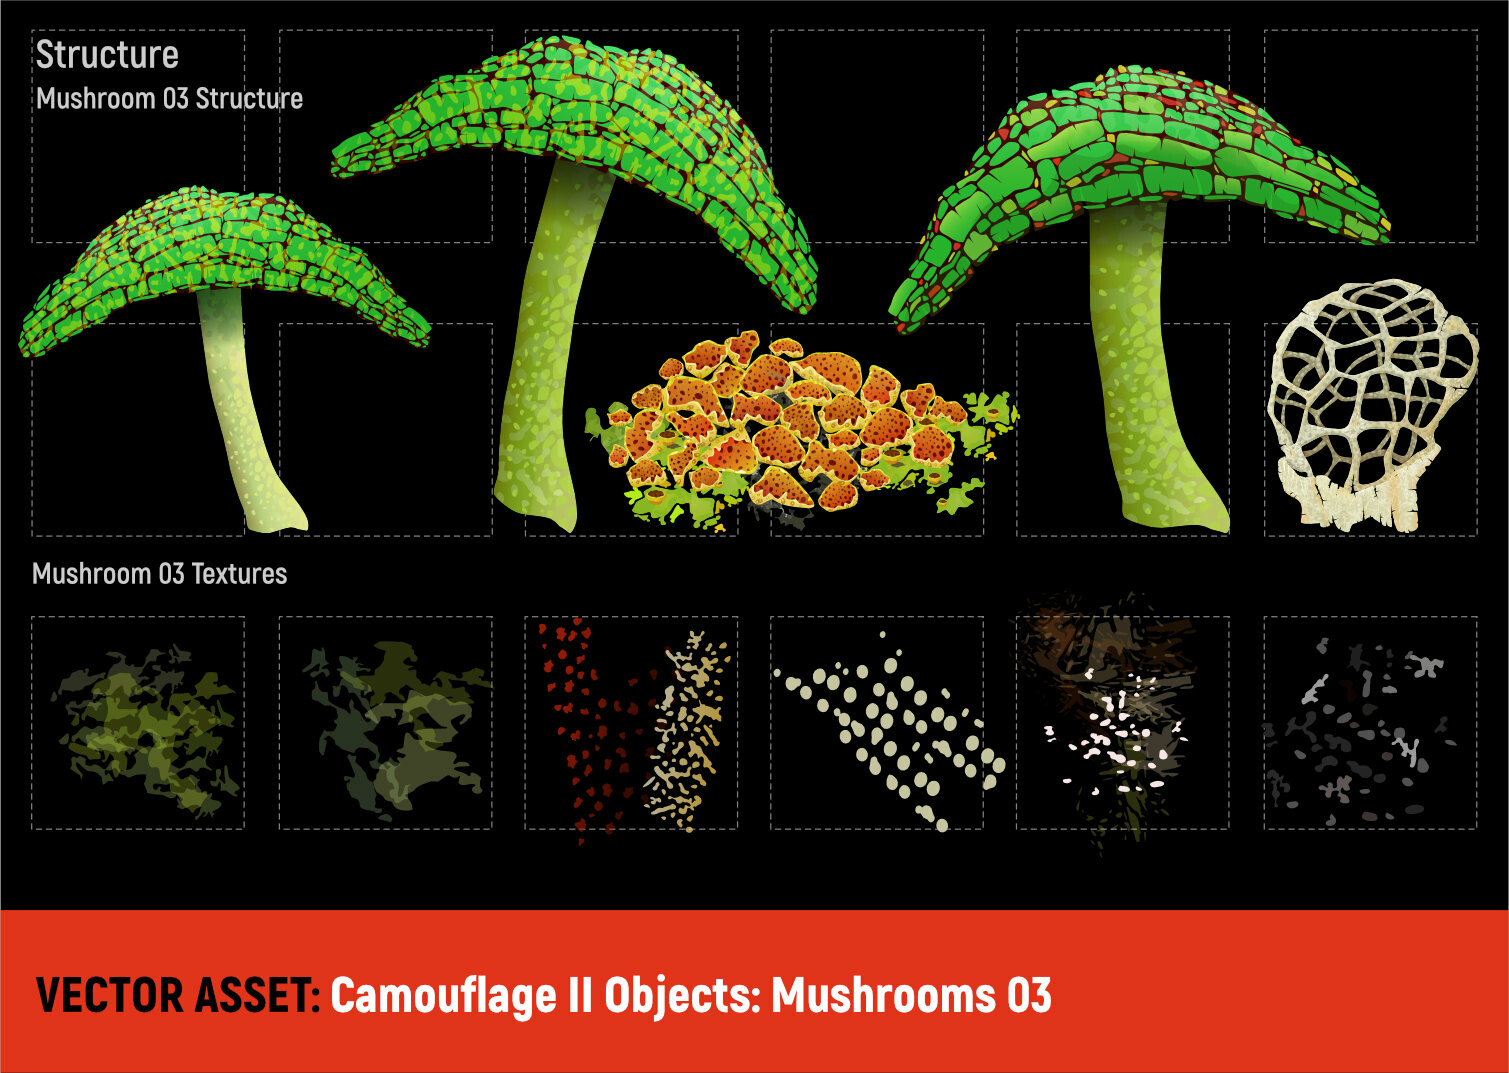 Vector Assets: Camouflage 2
Mushrooms 03